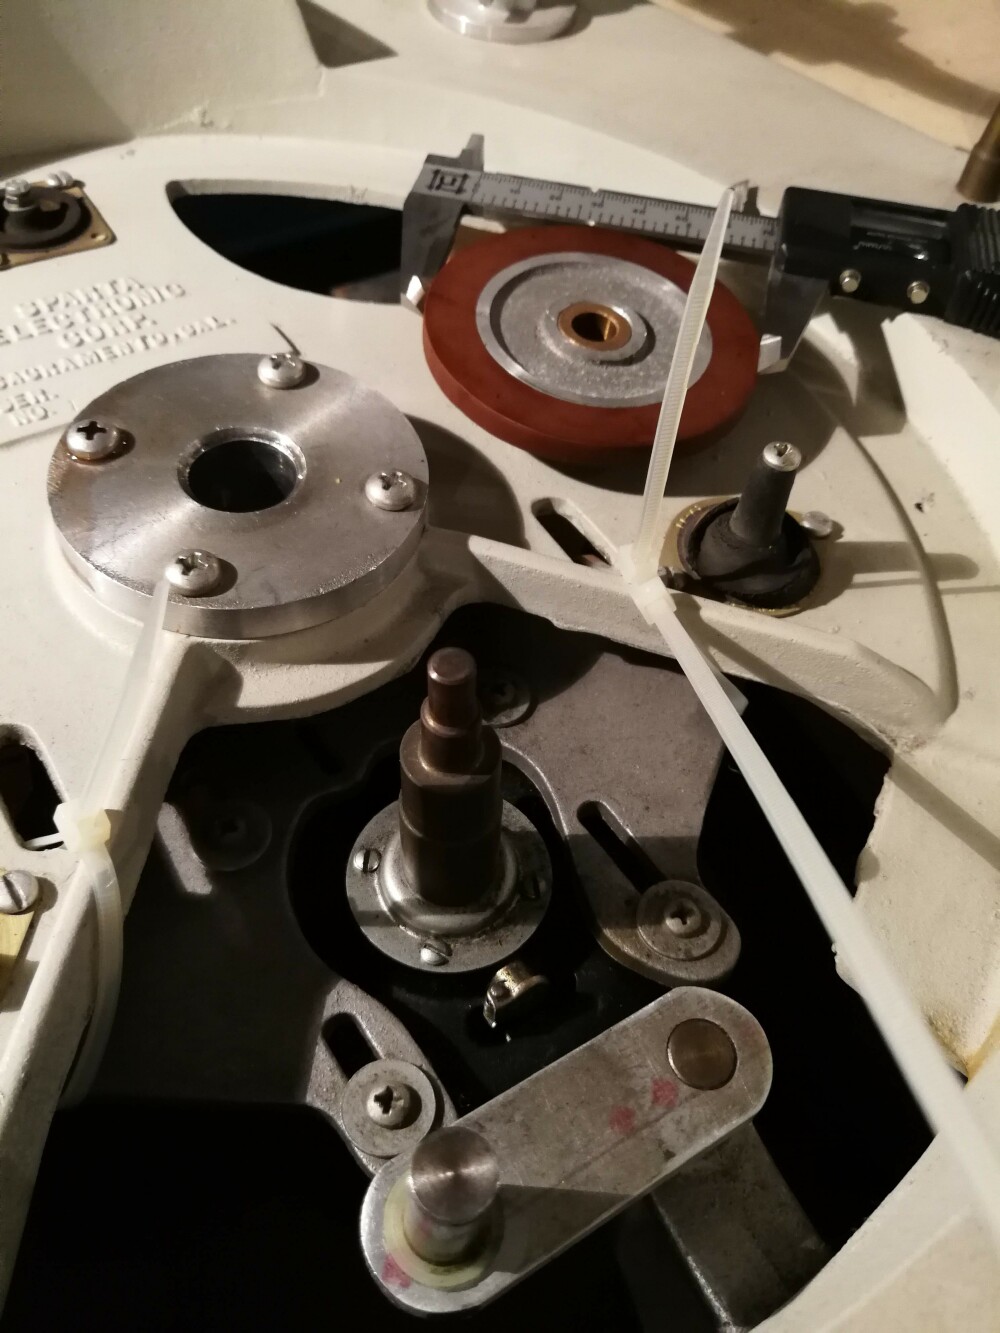 A new project: a custom-made 'classic' broadcast-quality turntable